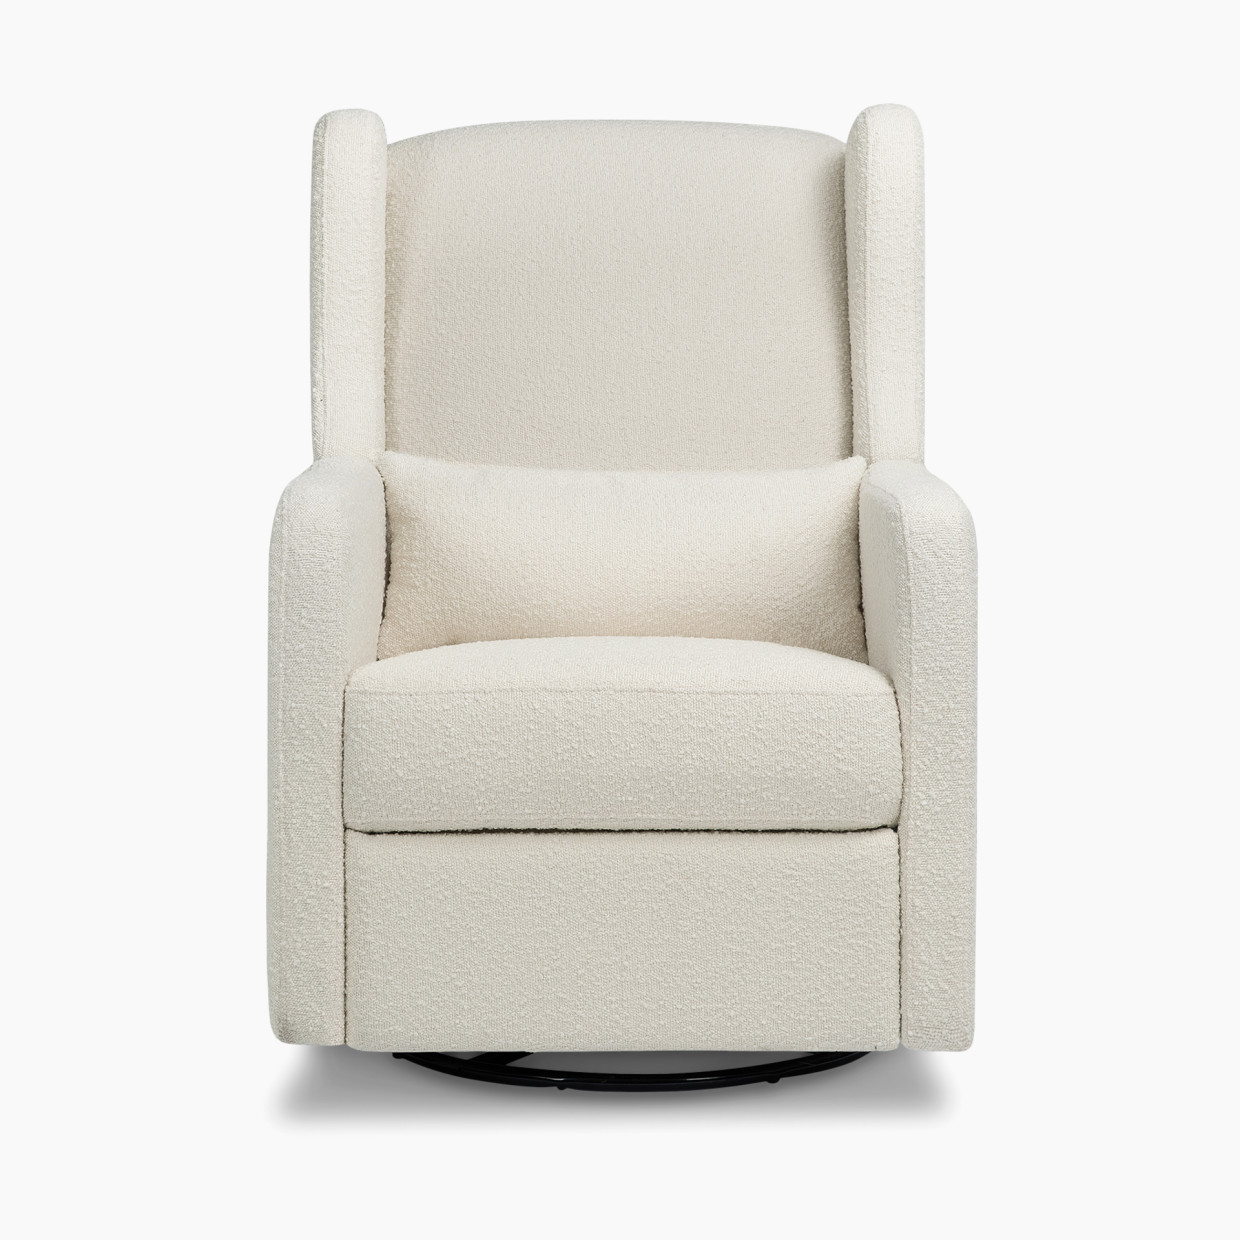 Carter's by DaVinci Arlo Recliner and Swivel Glider - Ivory Boucle.